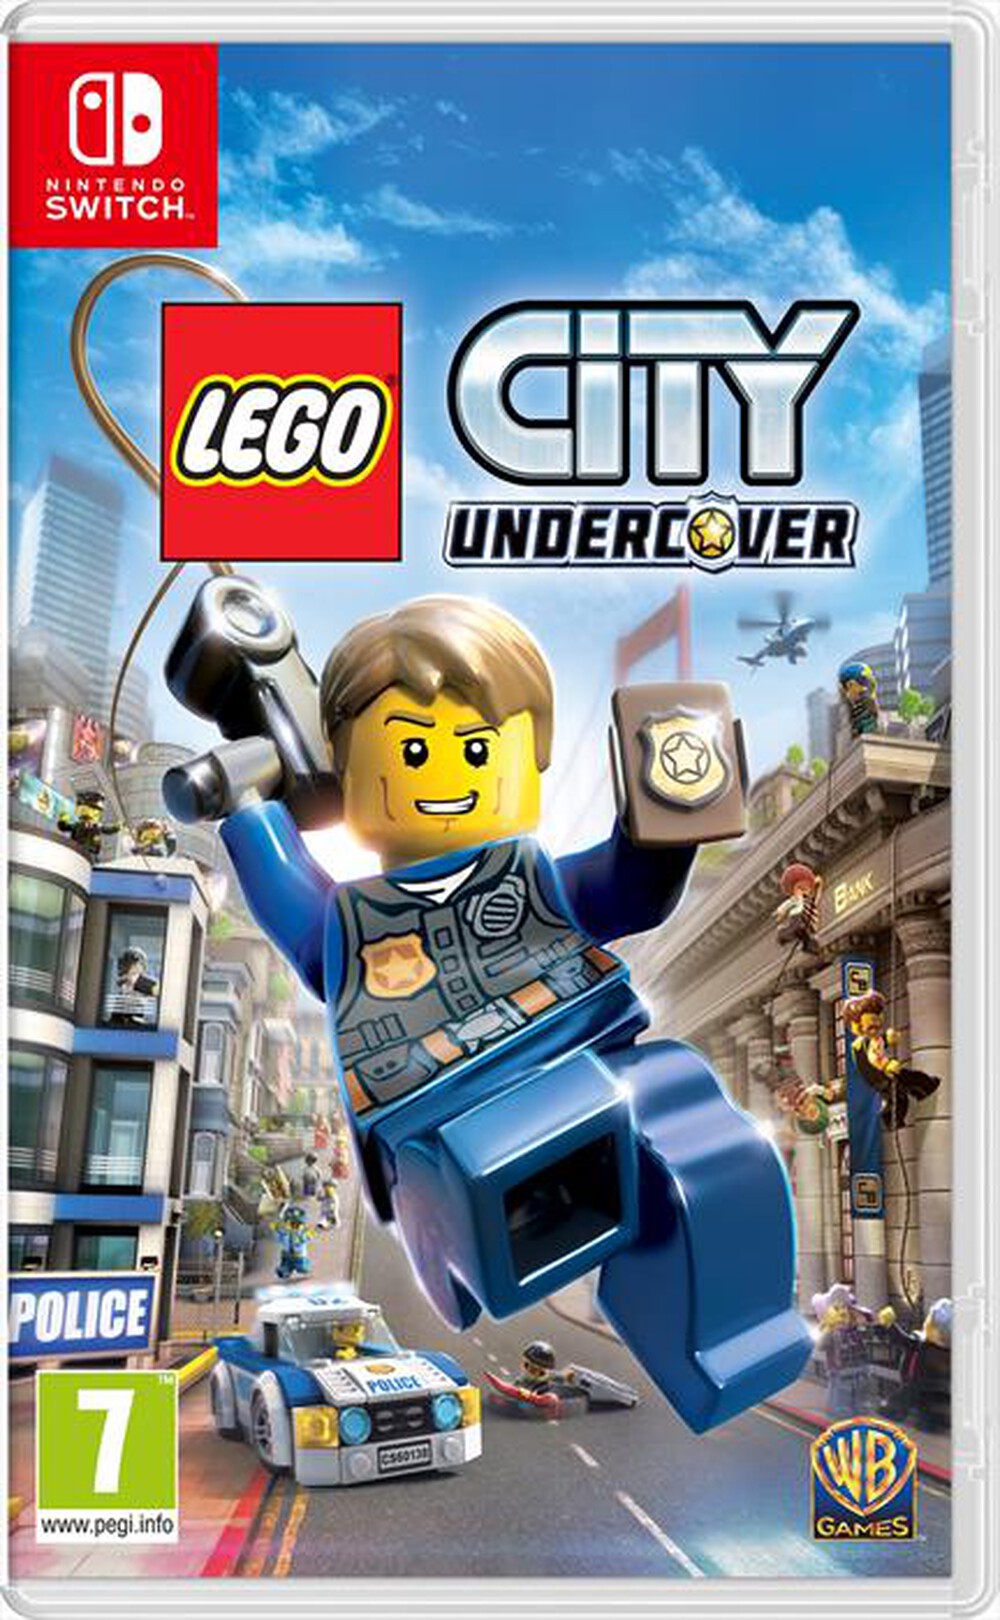 "WARNER GAMES - LEGO City Undercover SWITCH"